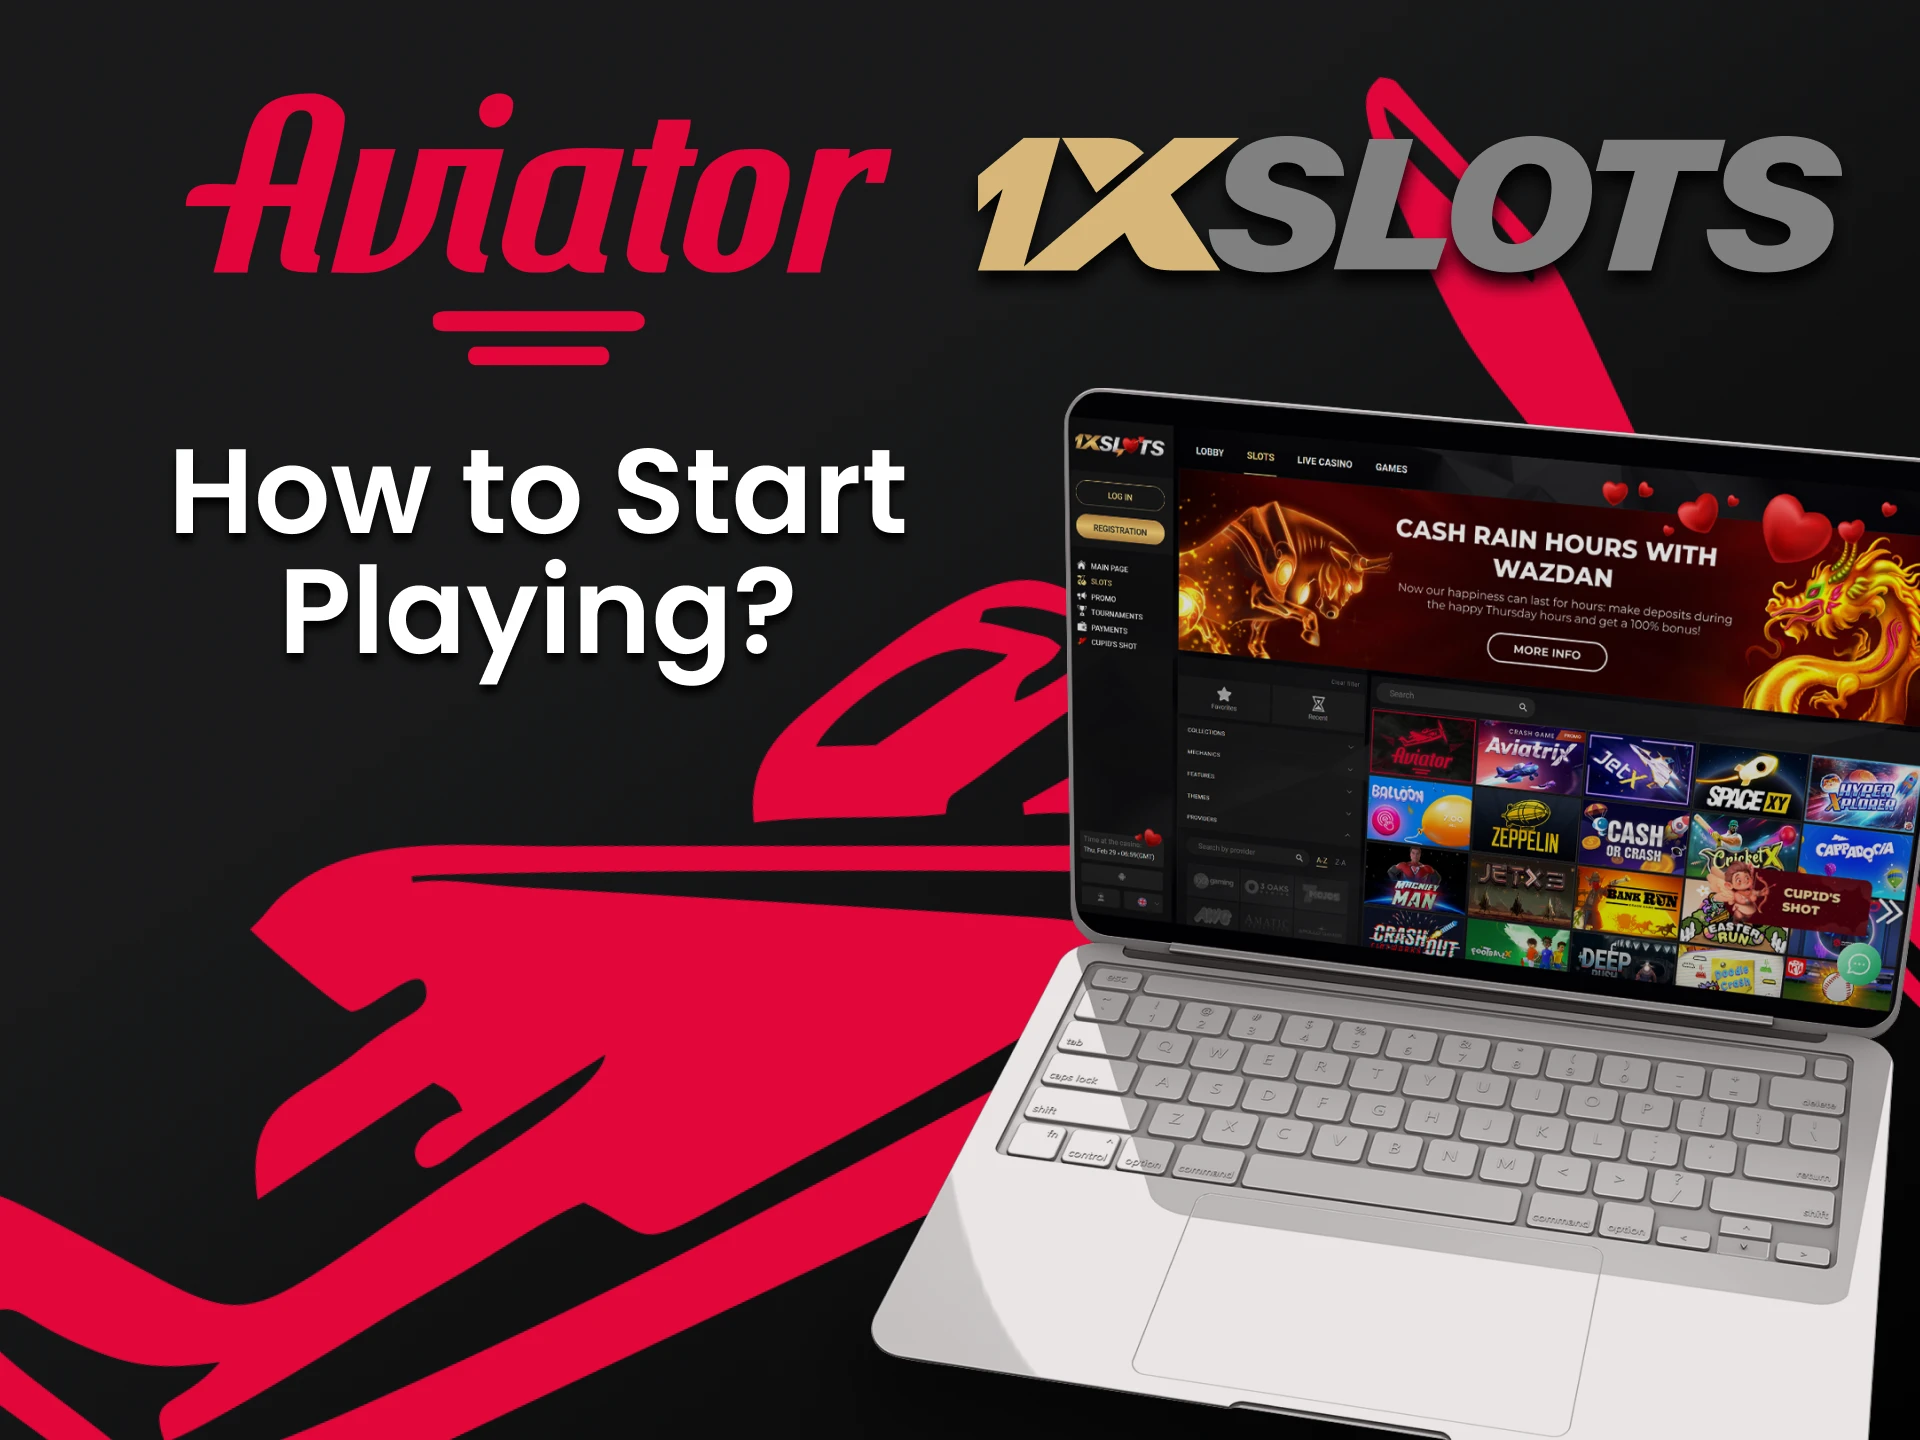 Choose an aviator at the casino from 1xslots.